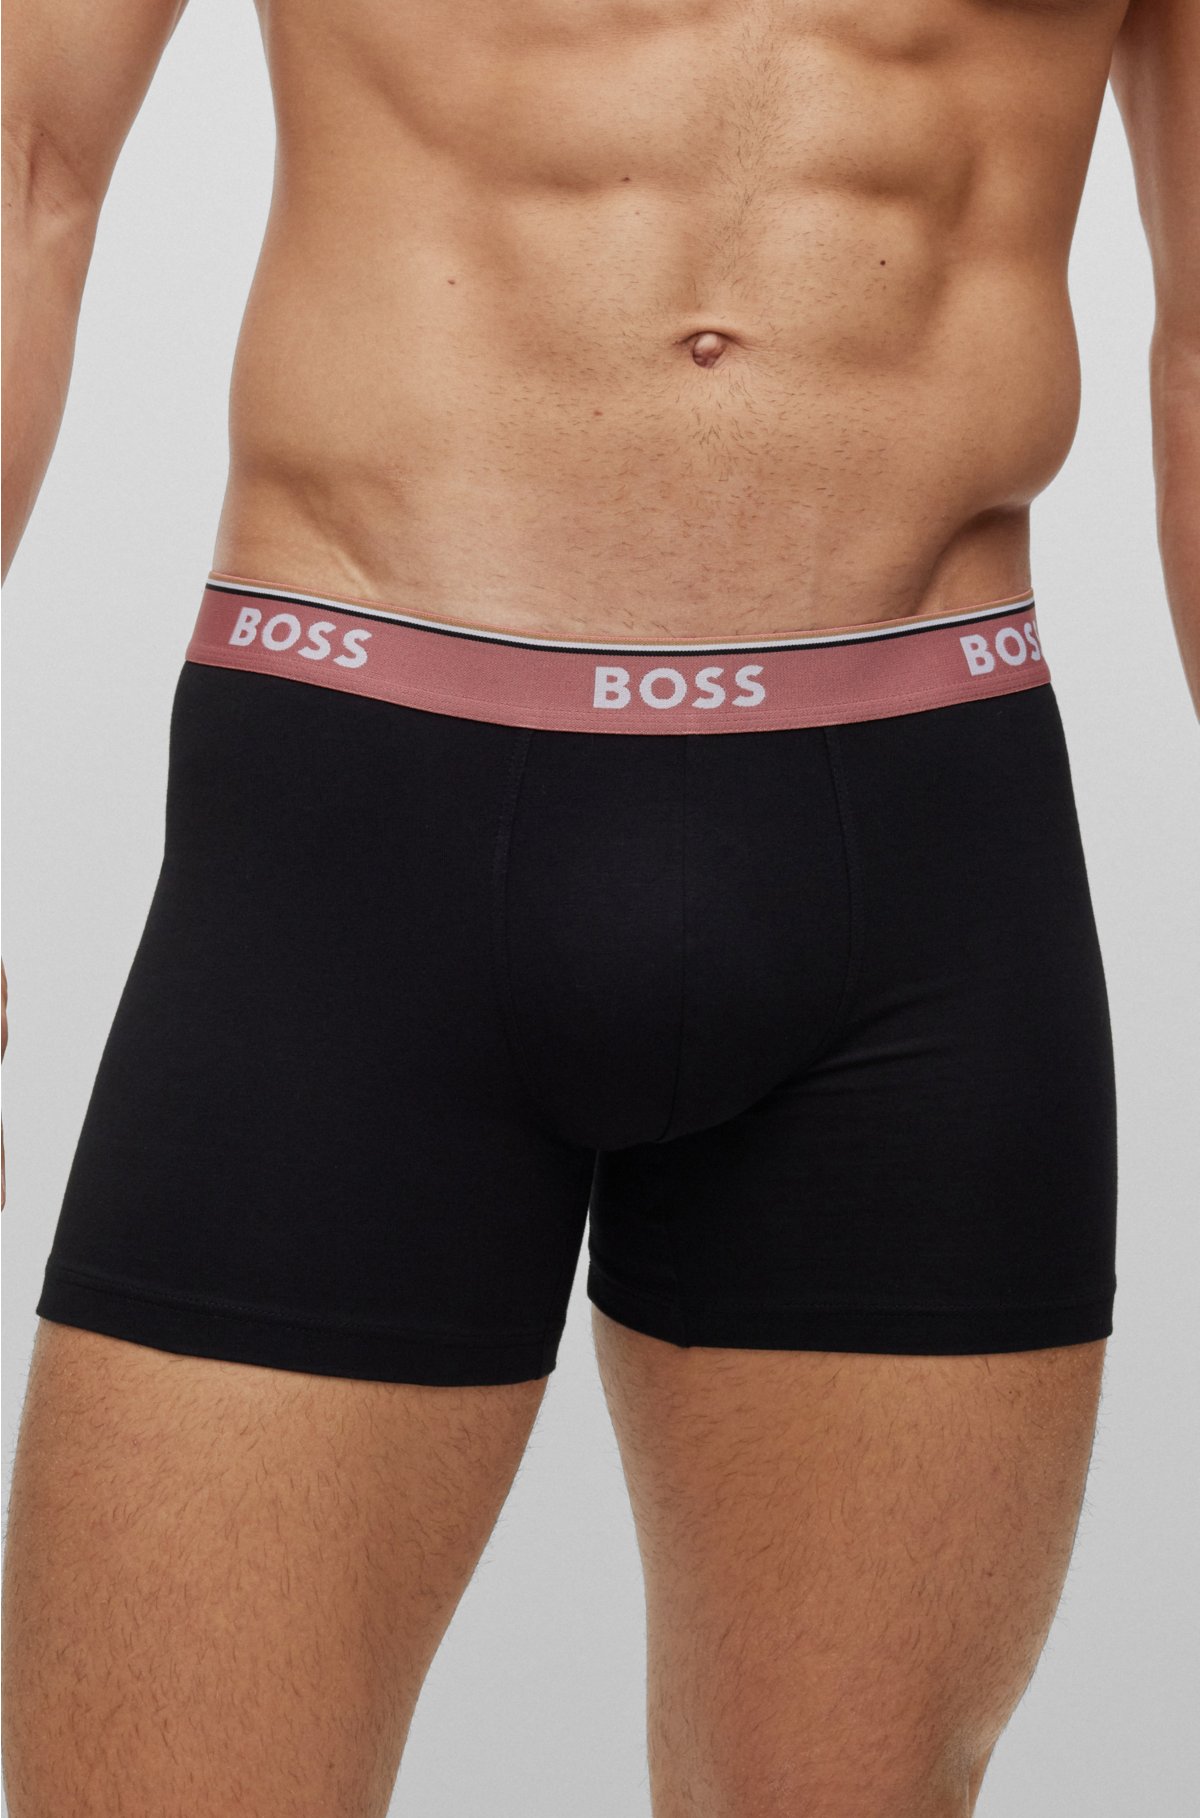 briefs of boxer - waistbands BOSS with Three-pack logo